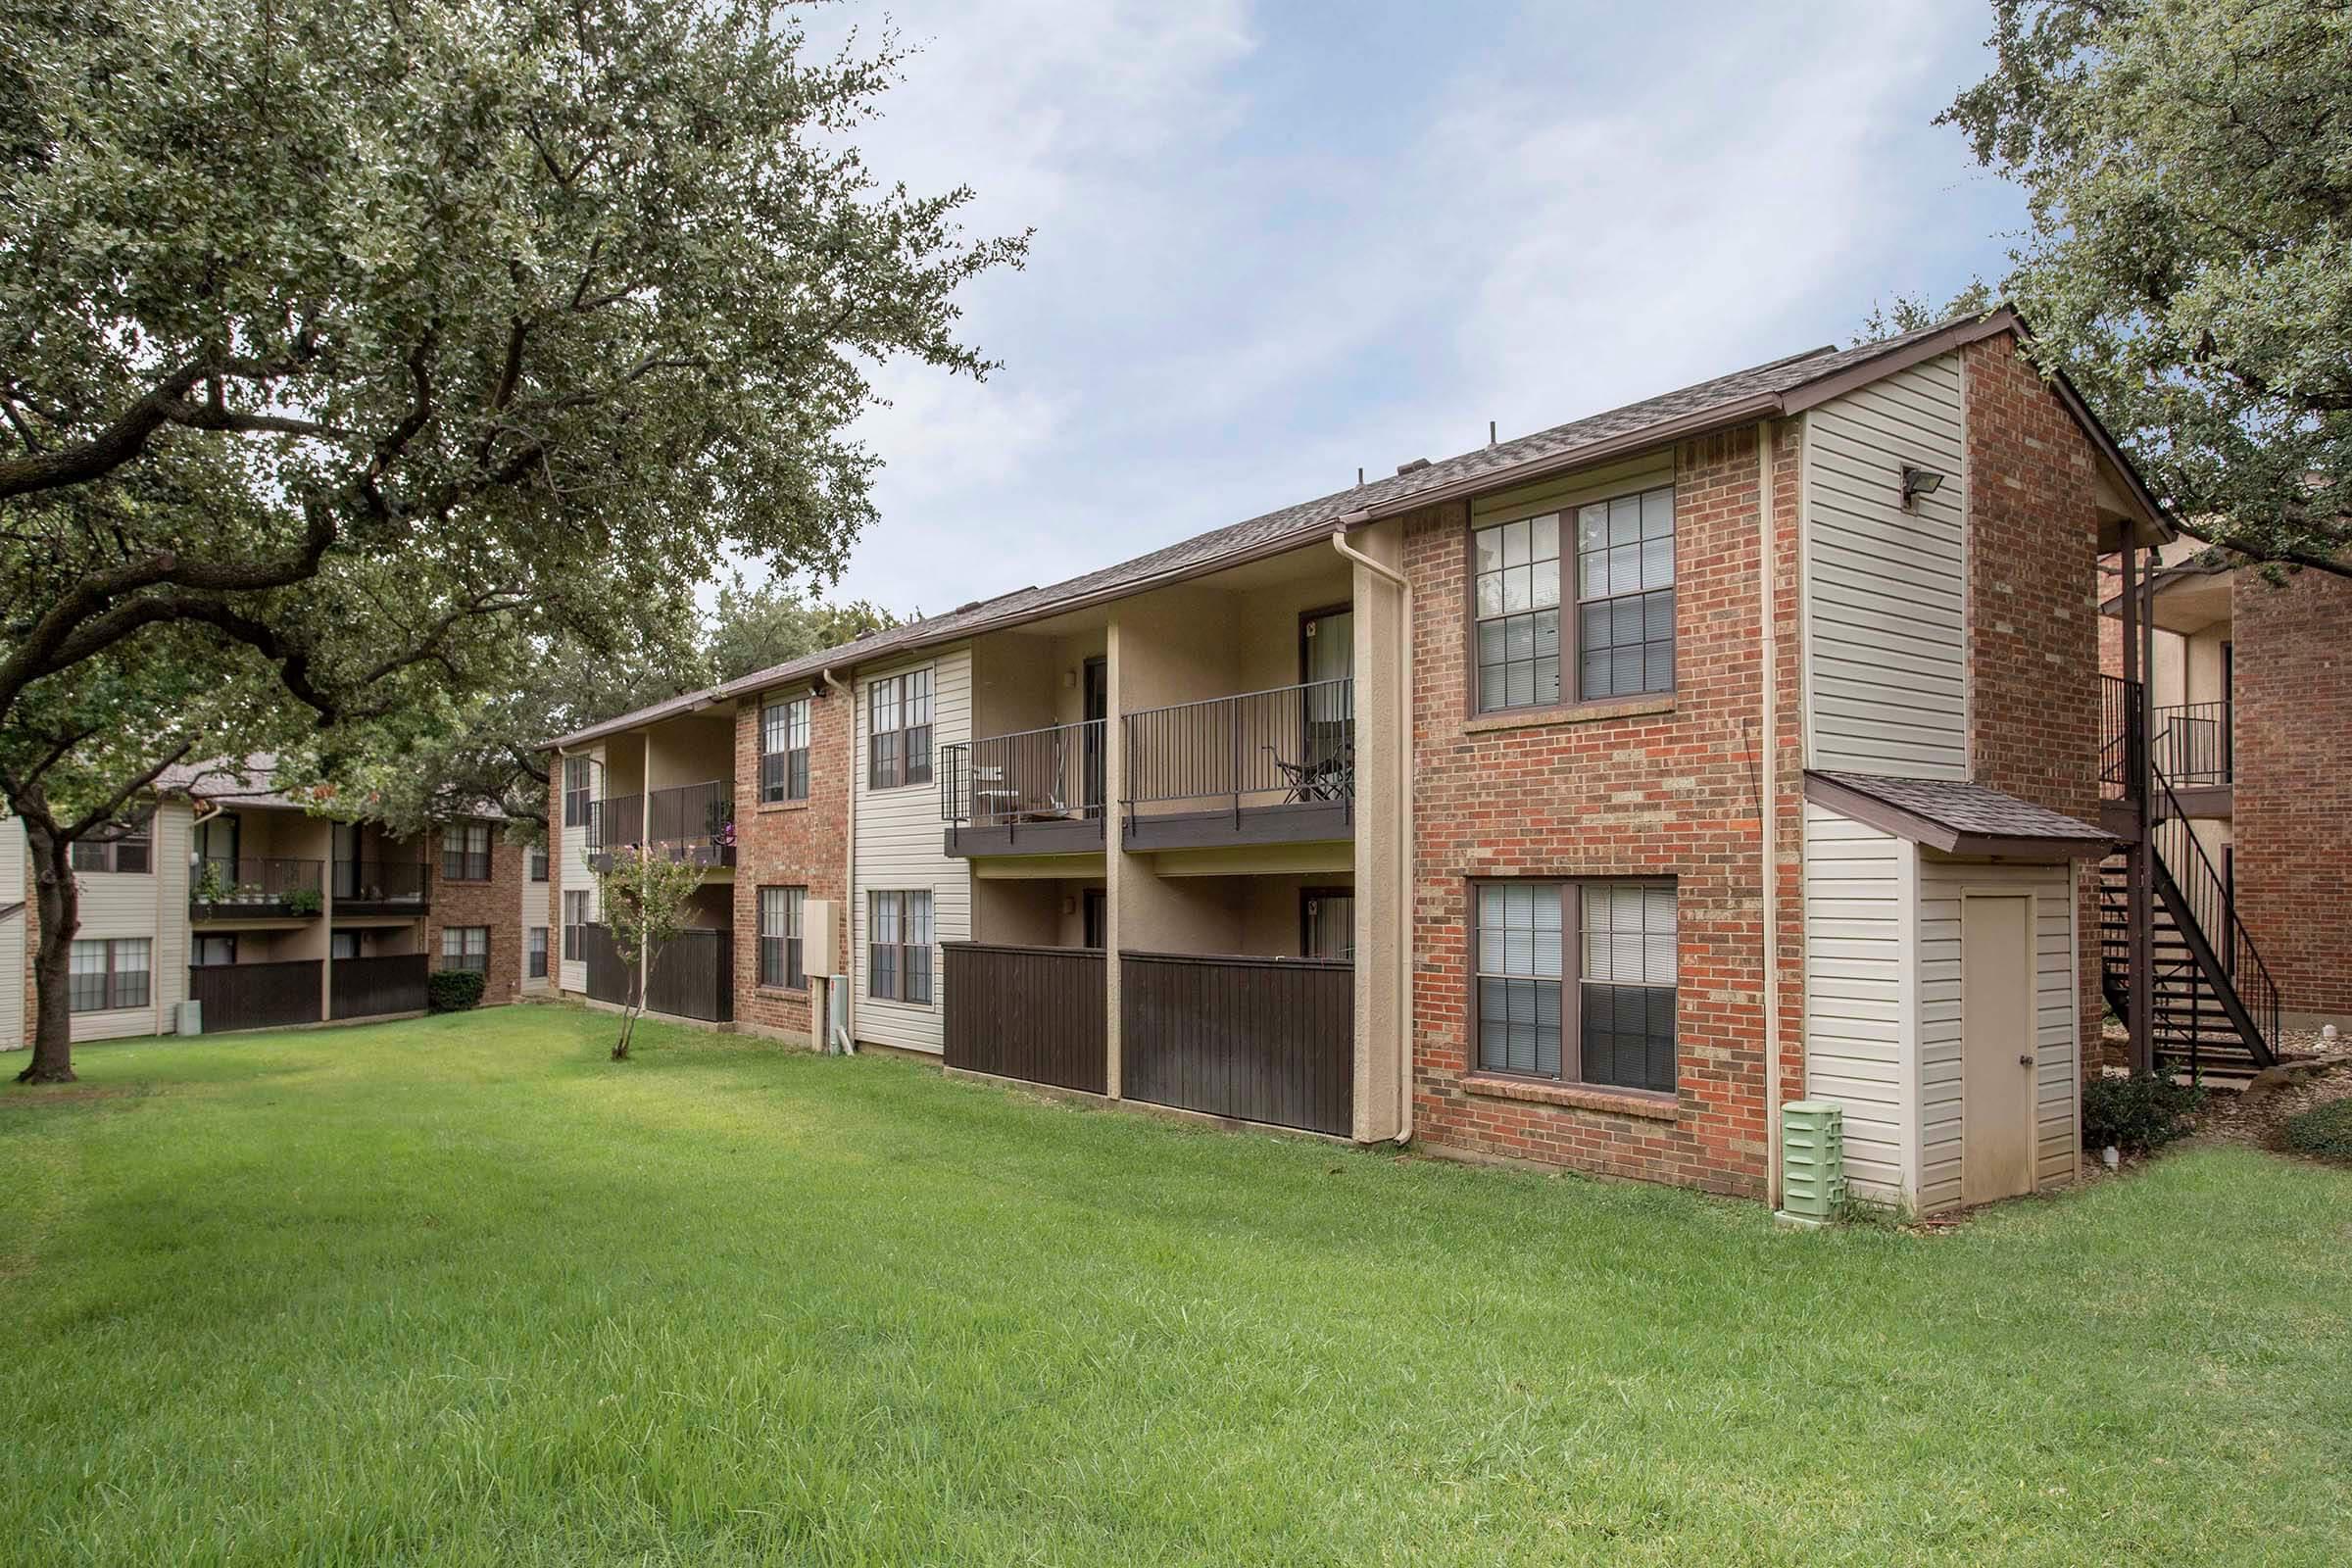 APARTMENT BALCONY OR PATIO AT THE AYVA IN IRVING, TEXAS